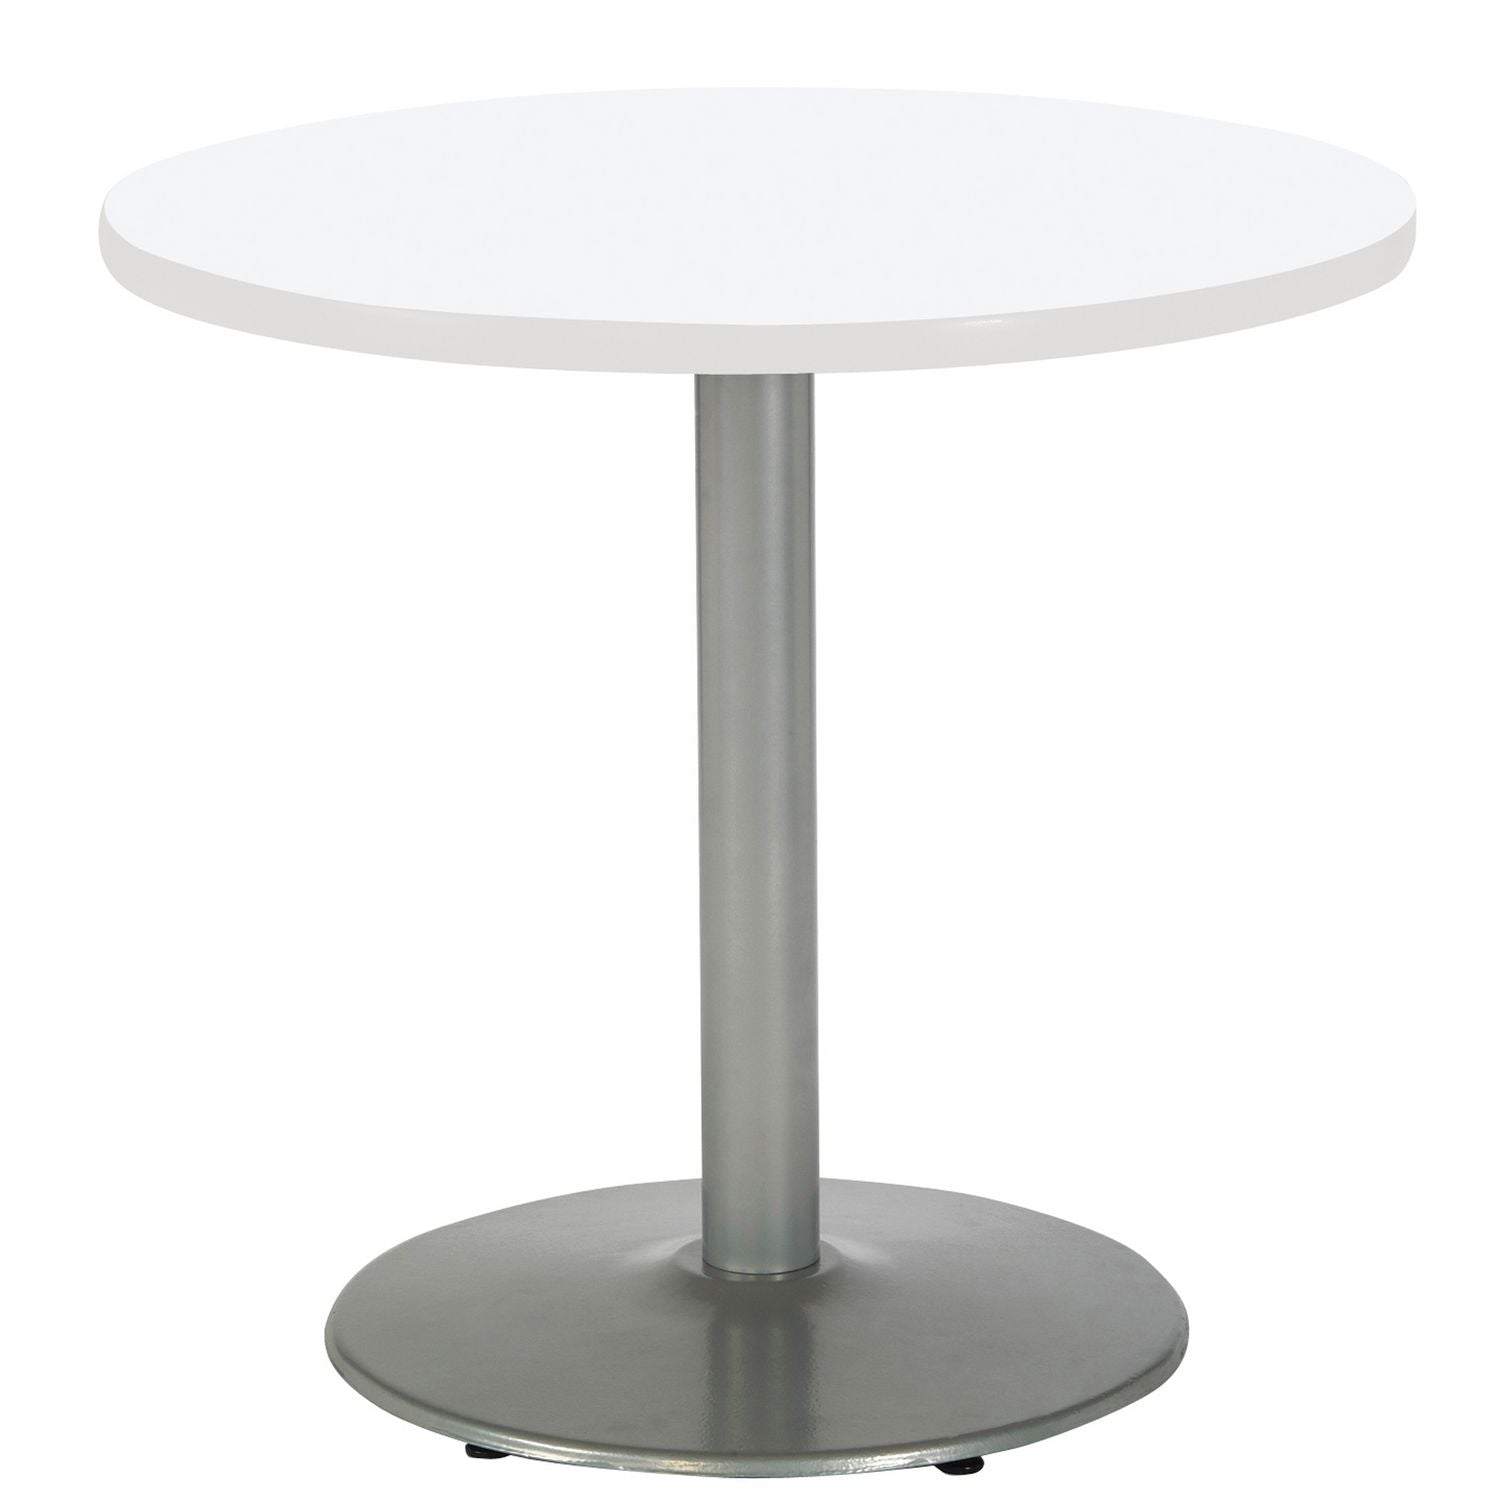 pedestal-table-with-four-yellow-kool-series-chairs-round-36-dia-x-29h-designer-white-ships-in-4-6-business-days_kfi811774036702 - 2